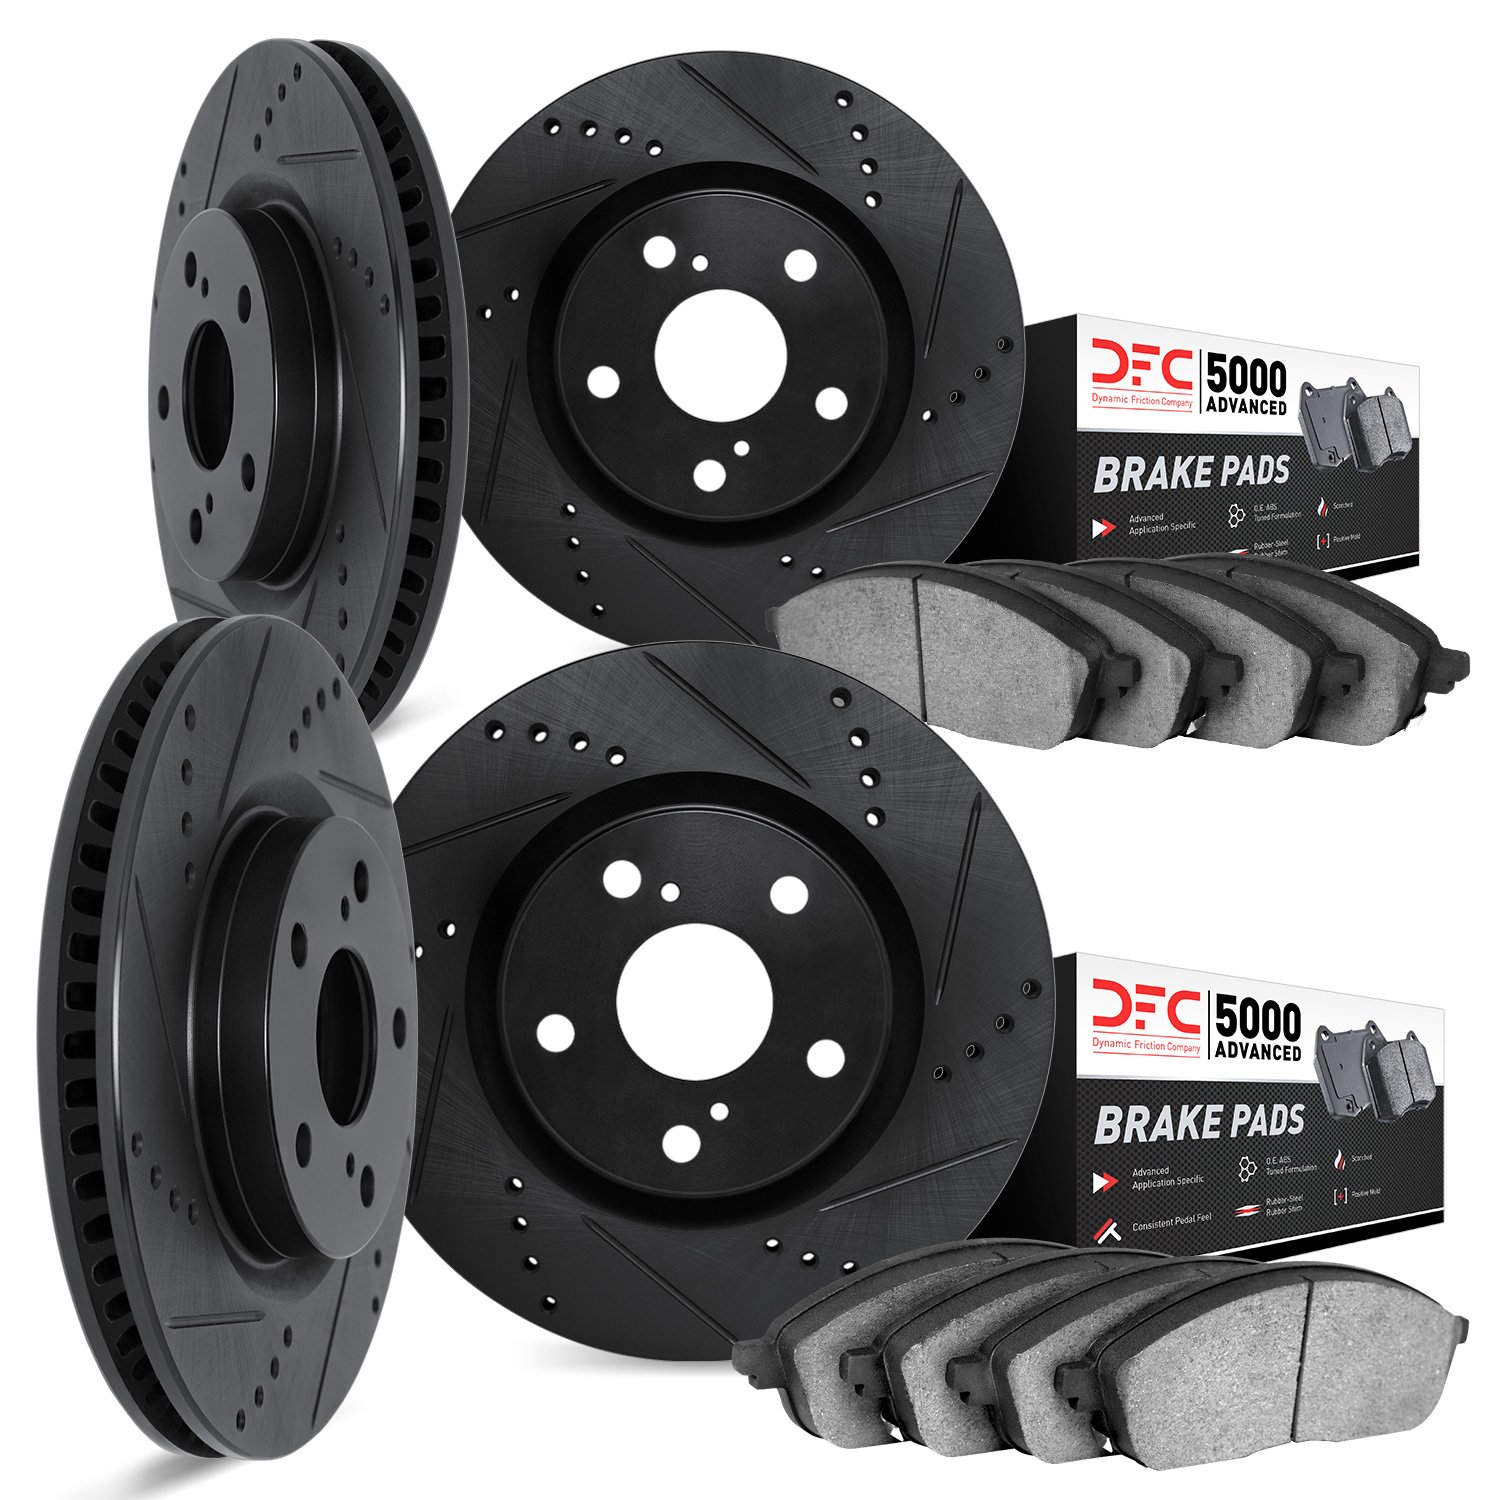 8504-73008 Drilled/Slotted Brake Rotors w/5000 Advanced Brake Pads Kit [Black], 2014-2018 Audi/Volkswagen, Position: Front and R